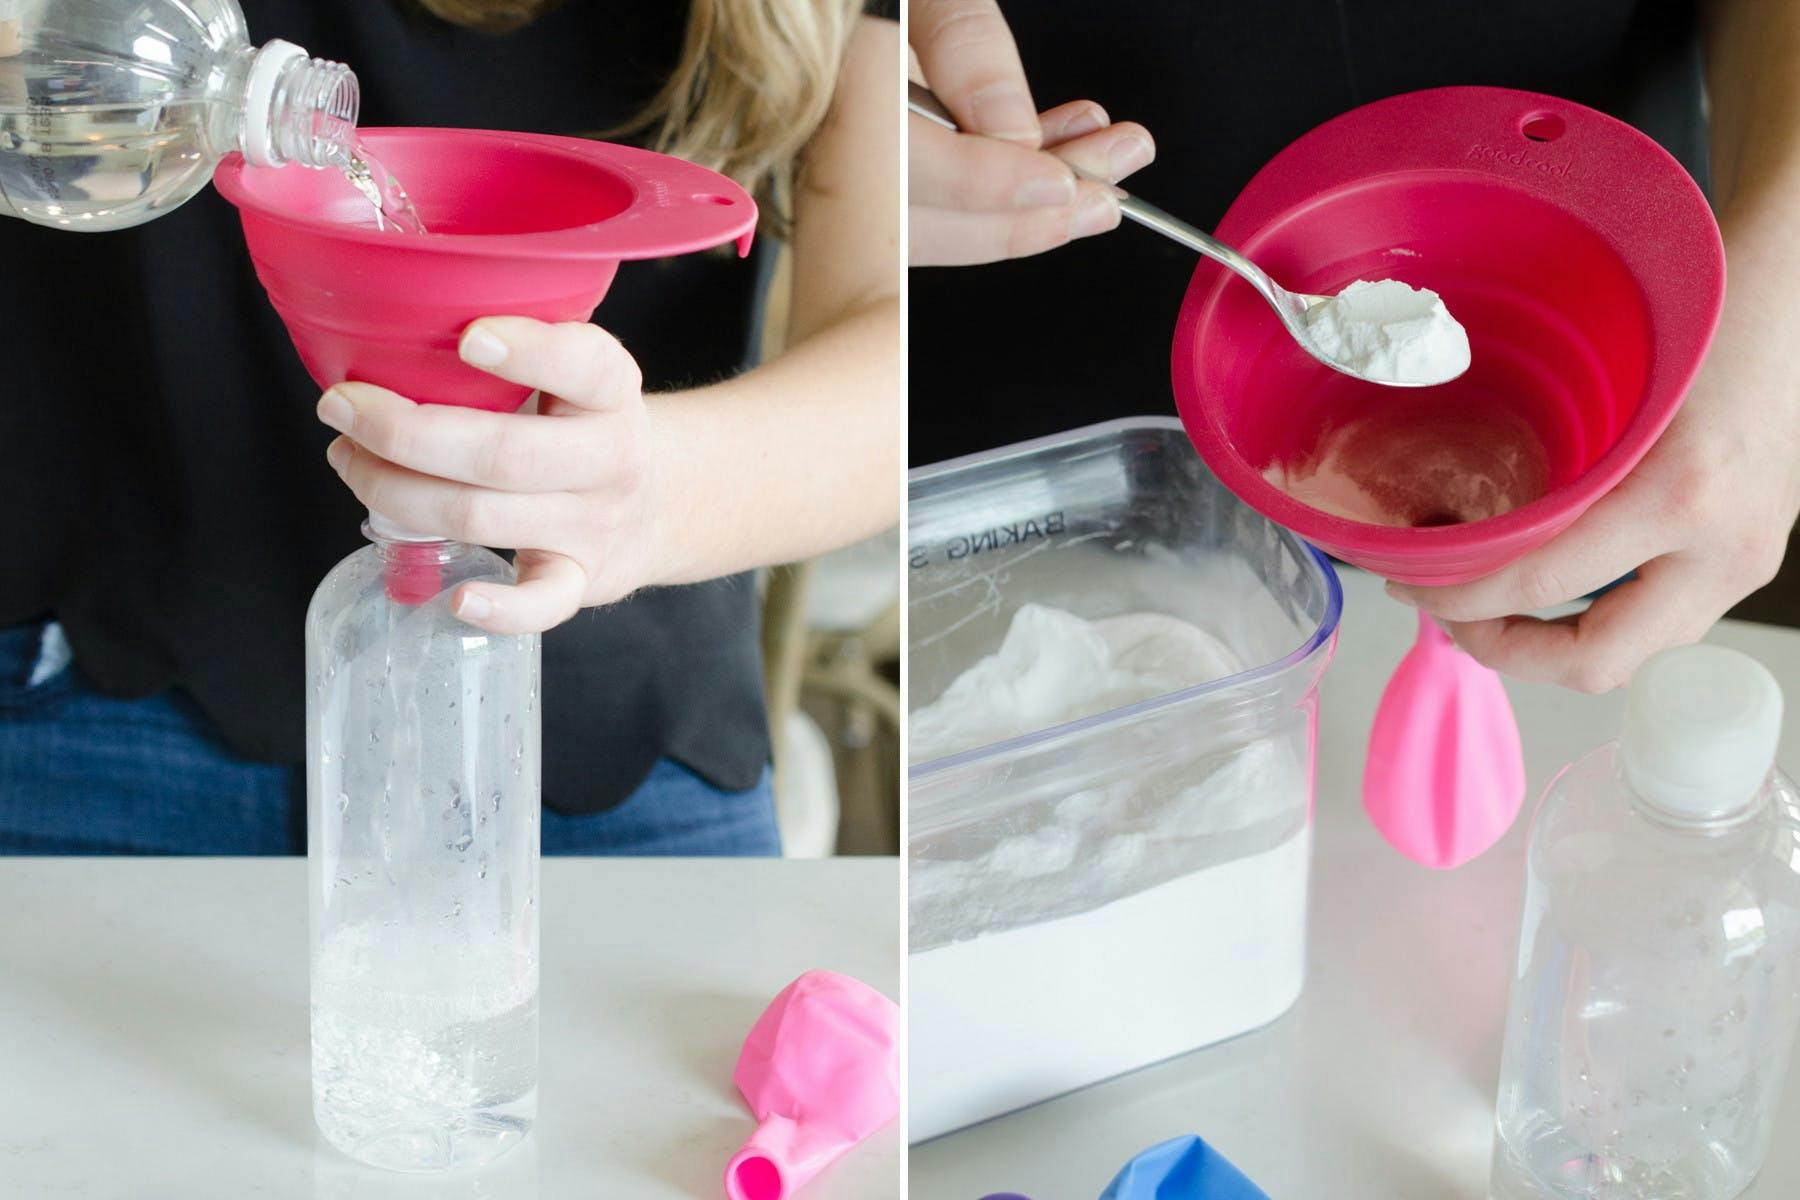 Someone filling a plastic bottle with vinegar and a balloon with baking soda